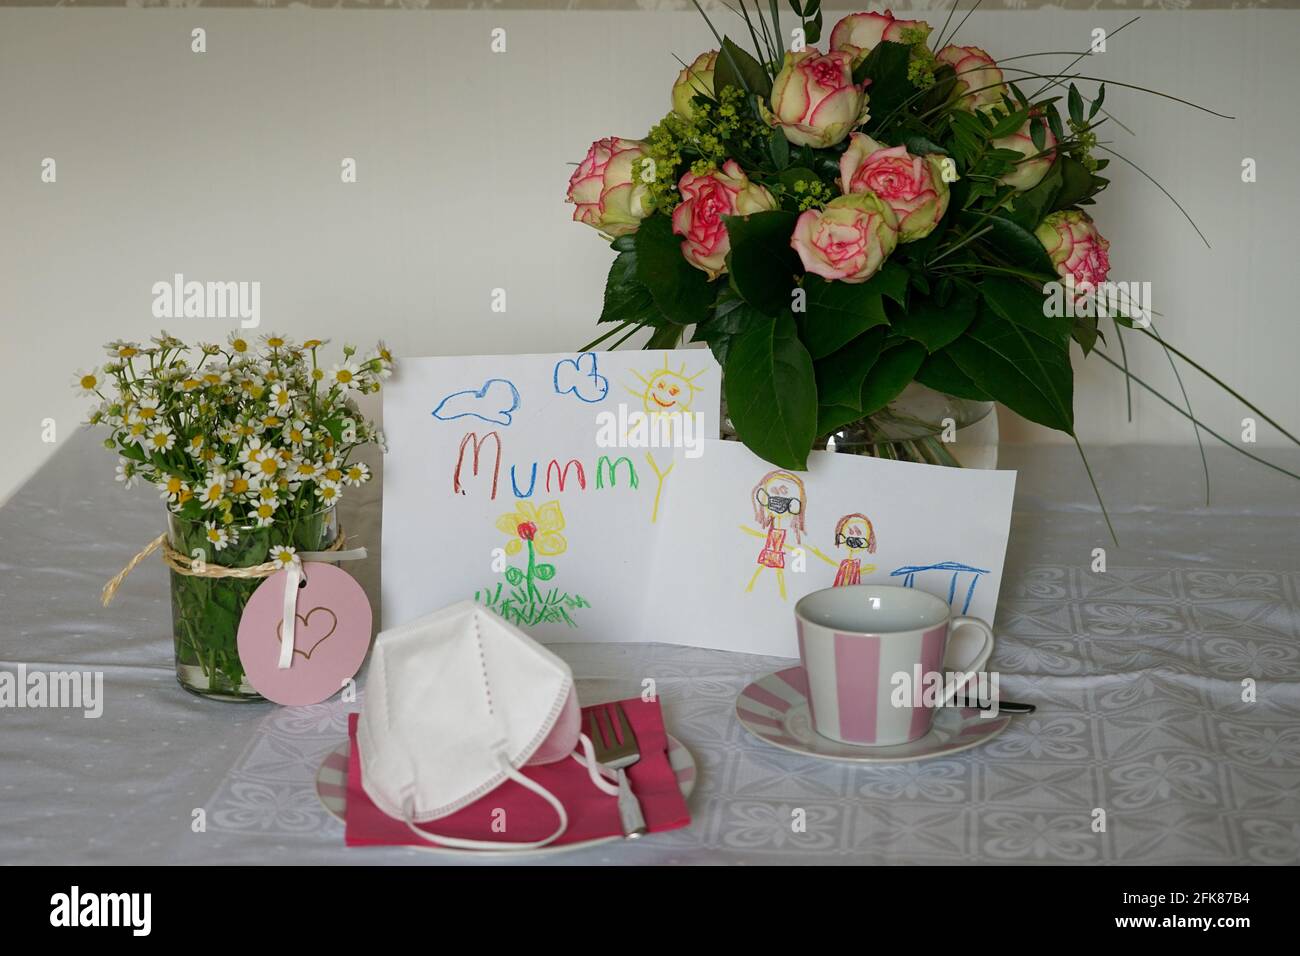 Mother's Day Stock Photo